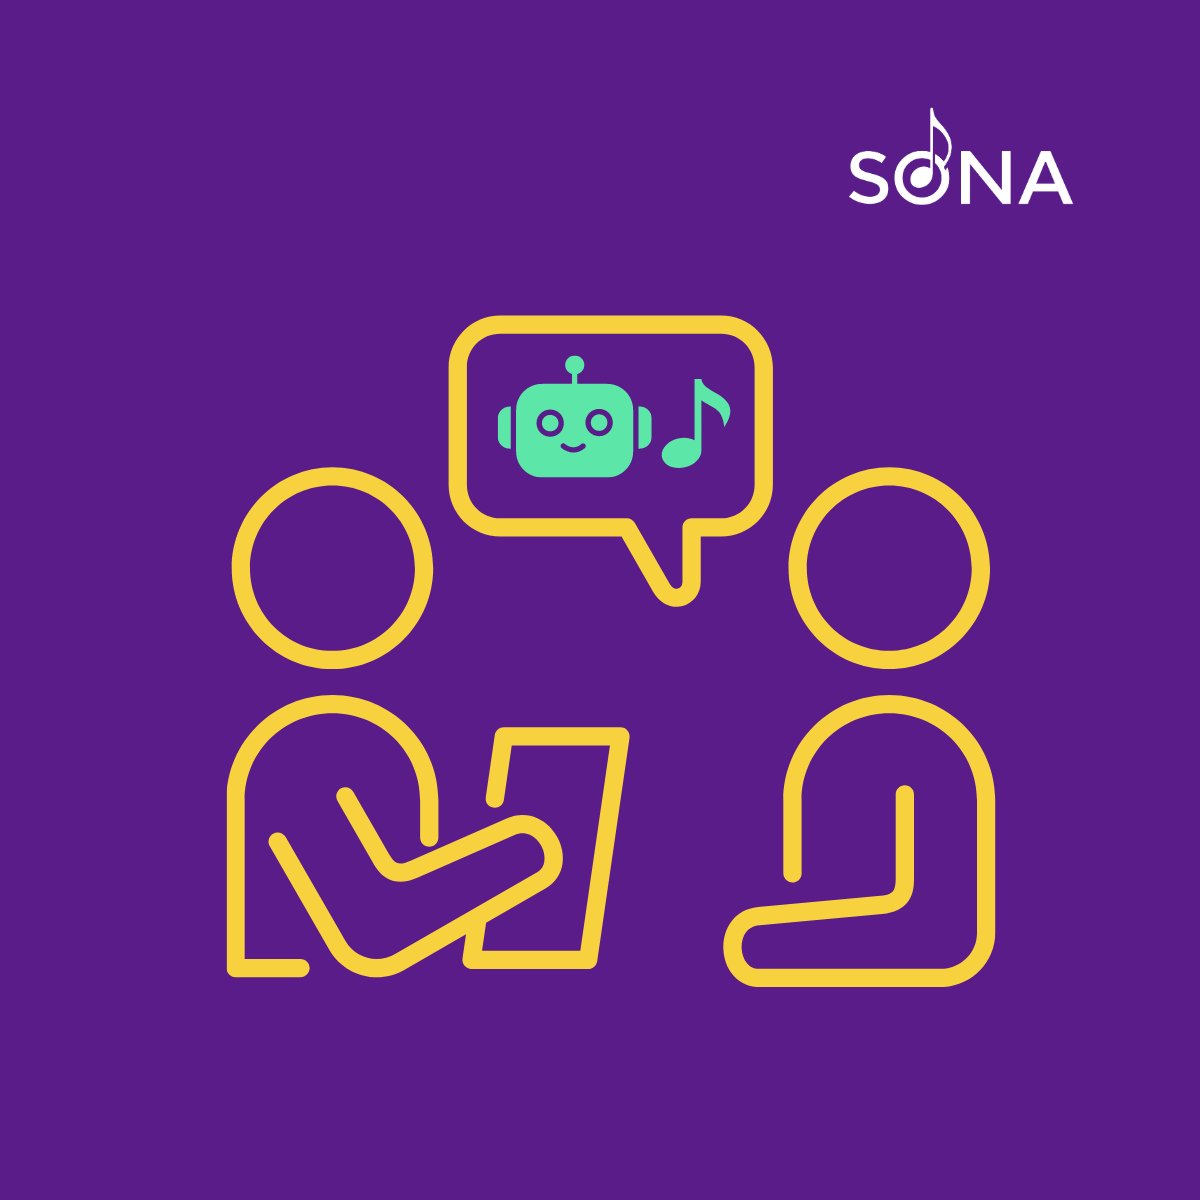 SONA is on the frontlines when it comes to issues surrounding artificial intelligence and music. That's why we need your input! We want to hear your thoughts and experiences with AI. Your feedback informs our advocacy work: surveymonkey.com/r/CF7VFLF #songwritersfirst #musicandai